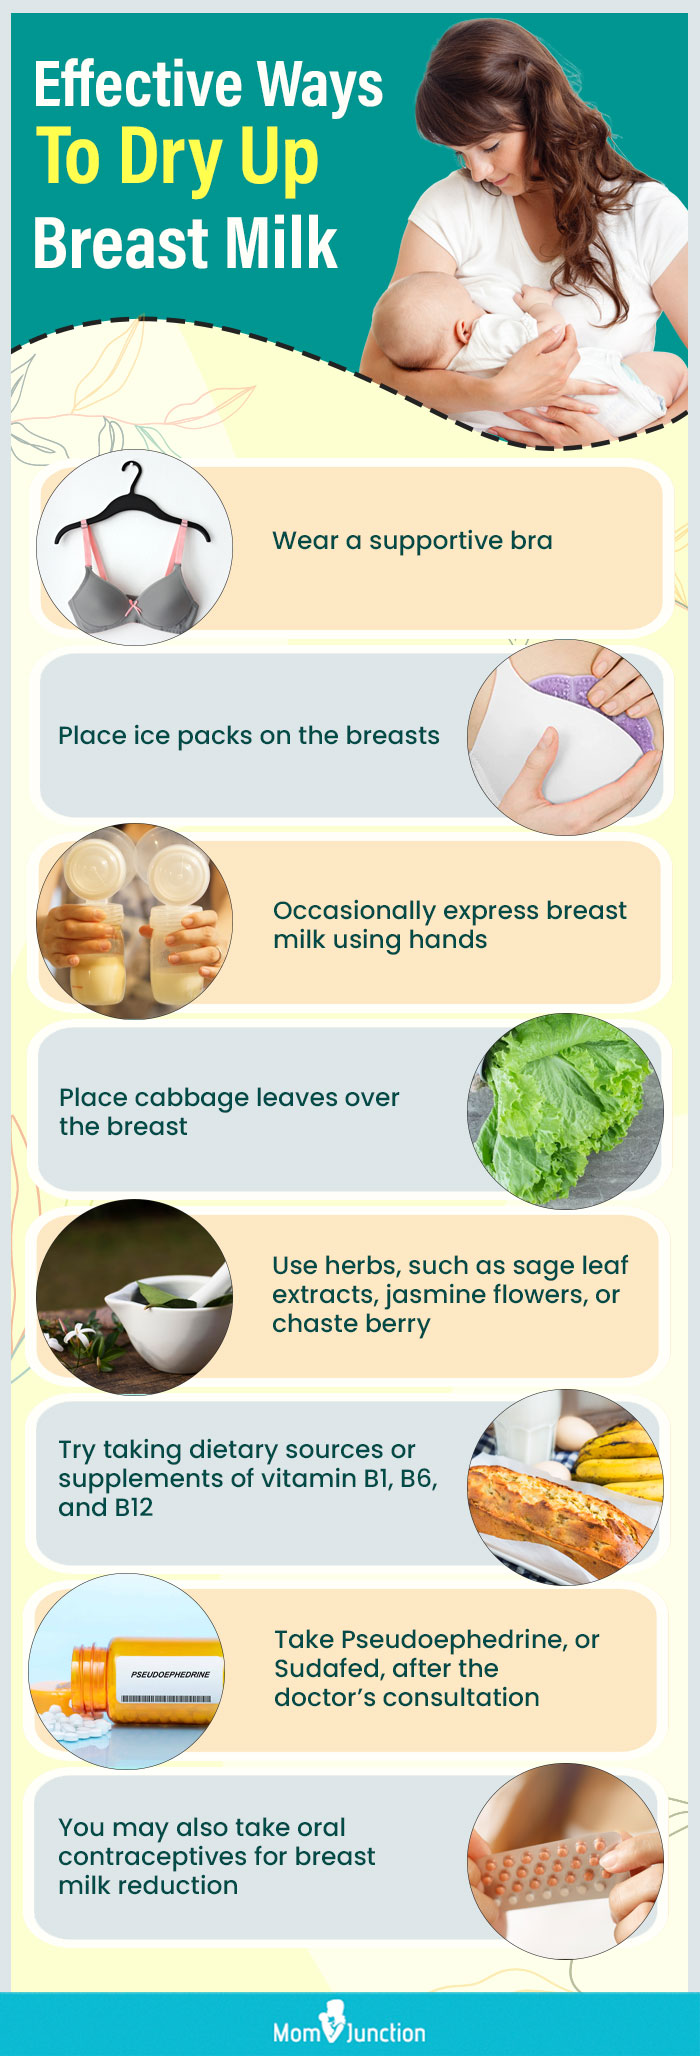 effective ways to dry up breast milk (infographic)